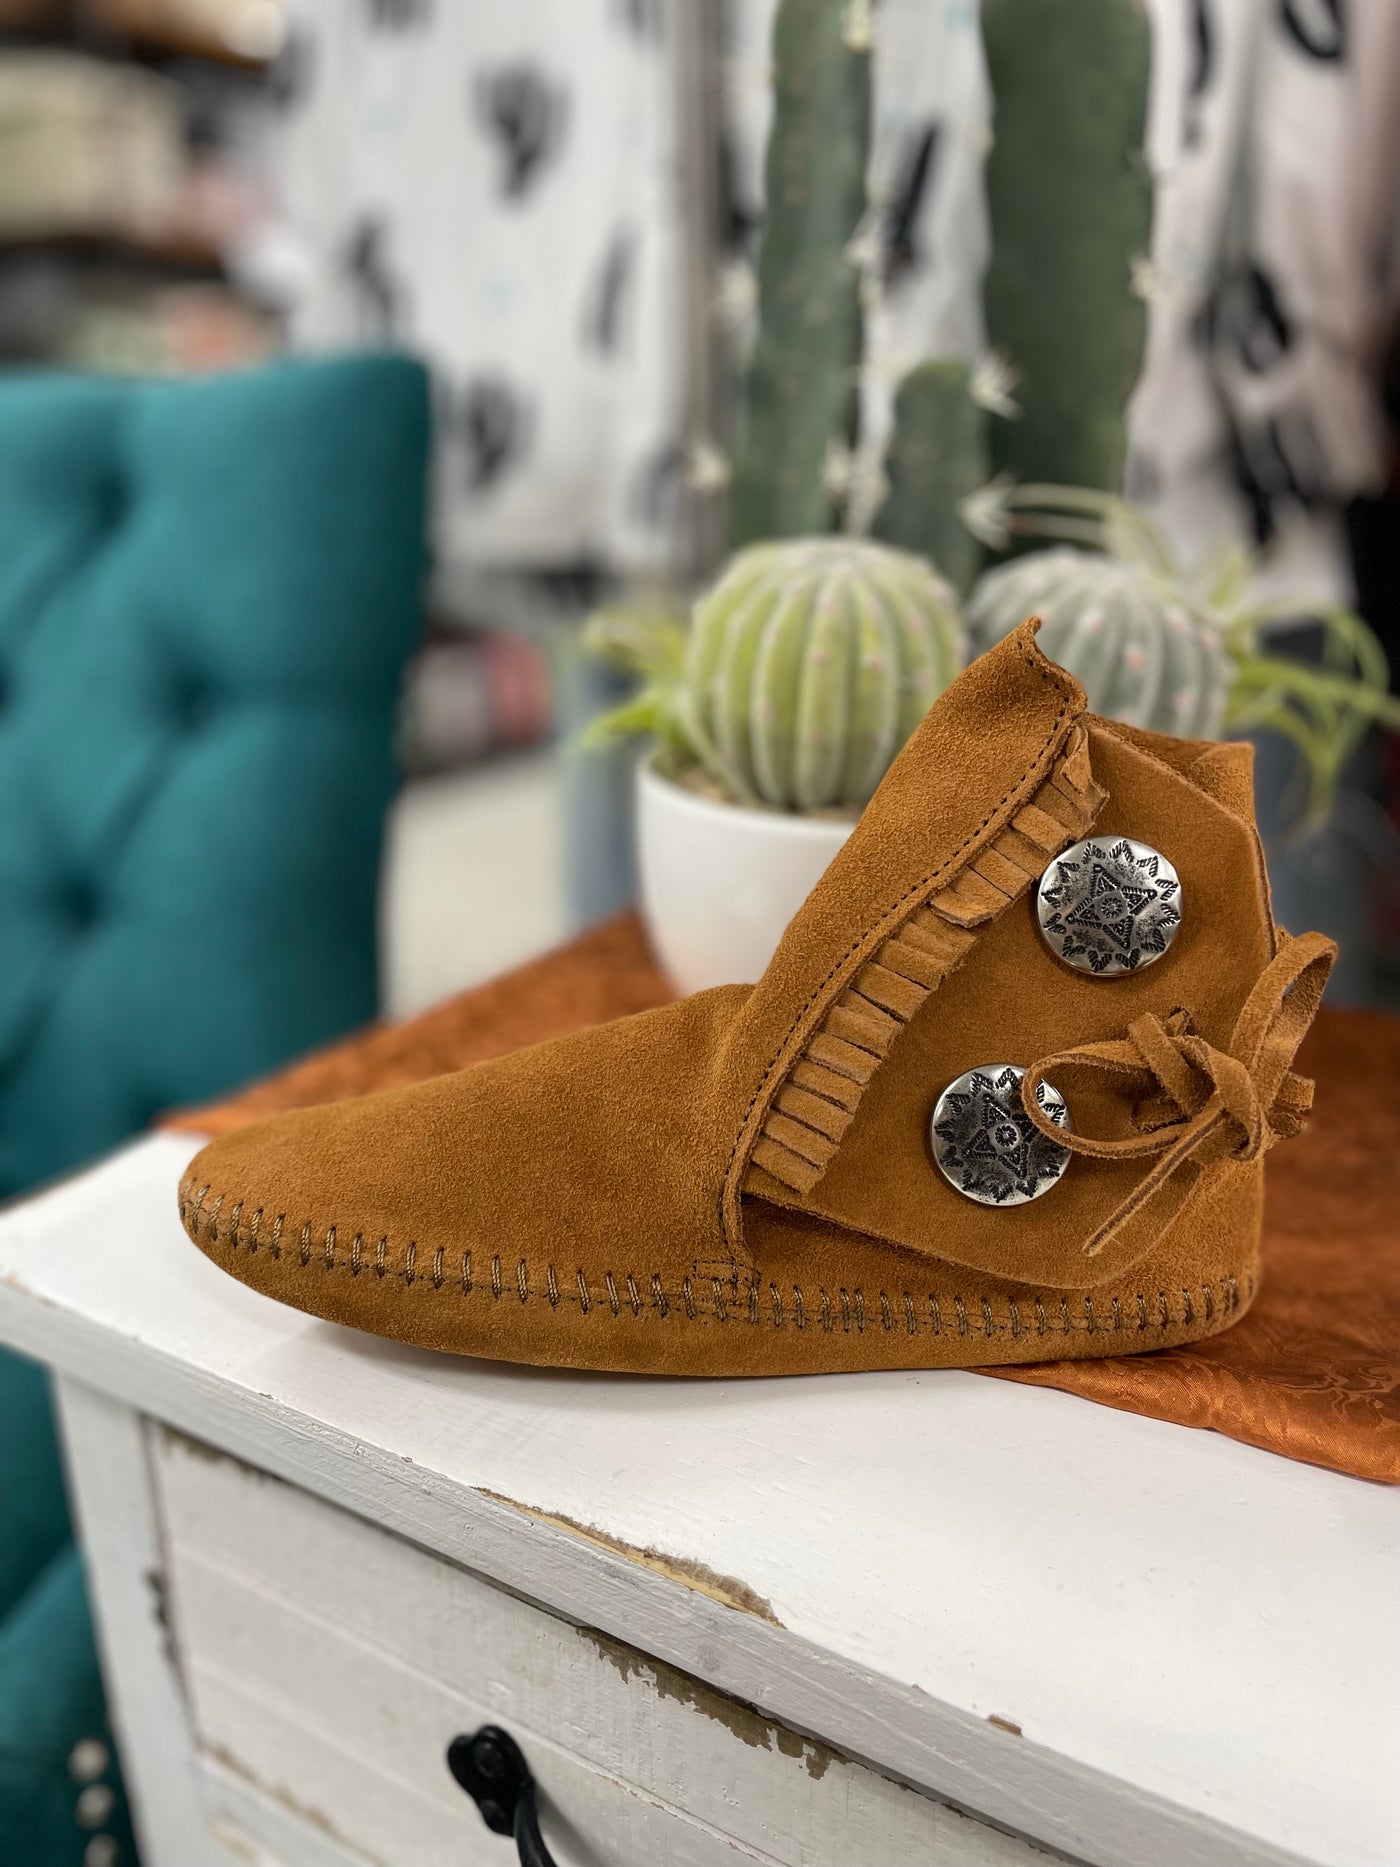 The Tessa Double Button Moccasin Bootie